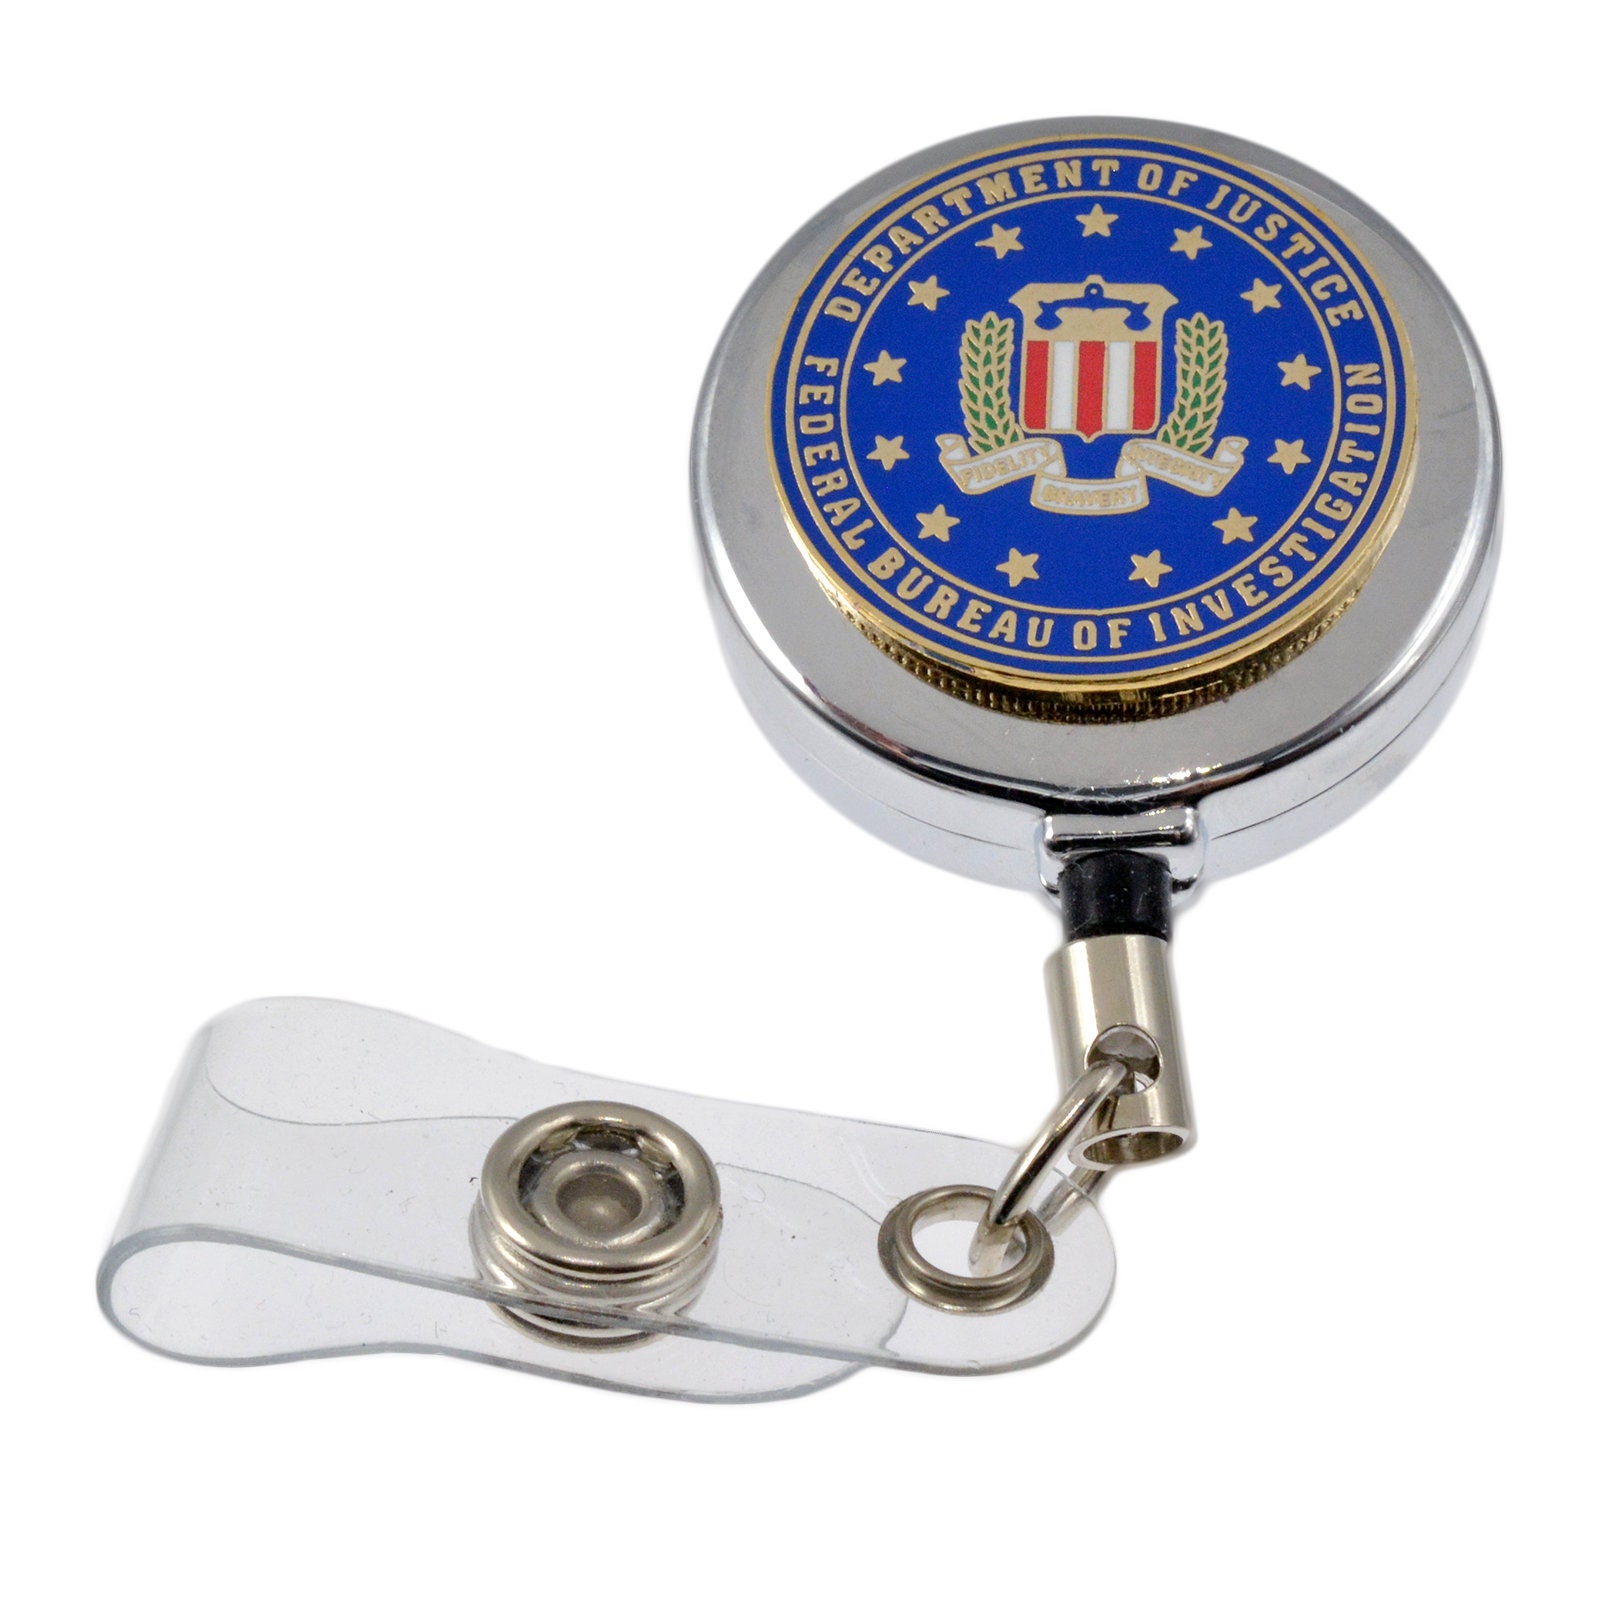 Seo Security Enforcement Officer Mini Badge Retractable ID Card Holder Reel Gold